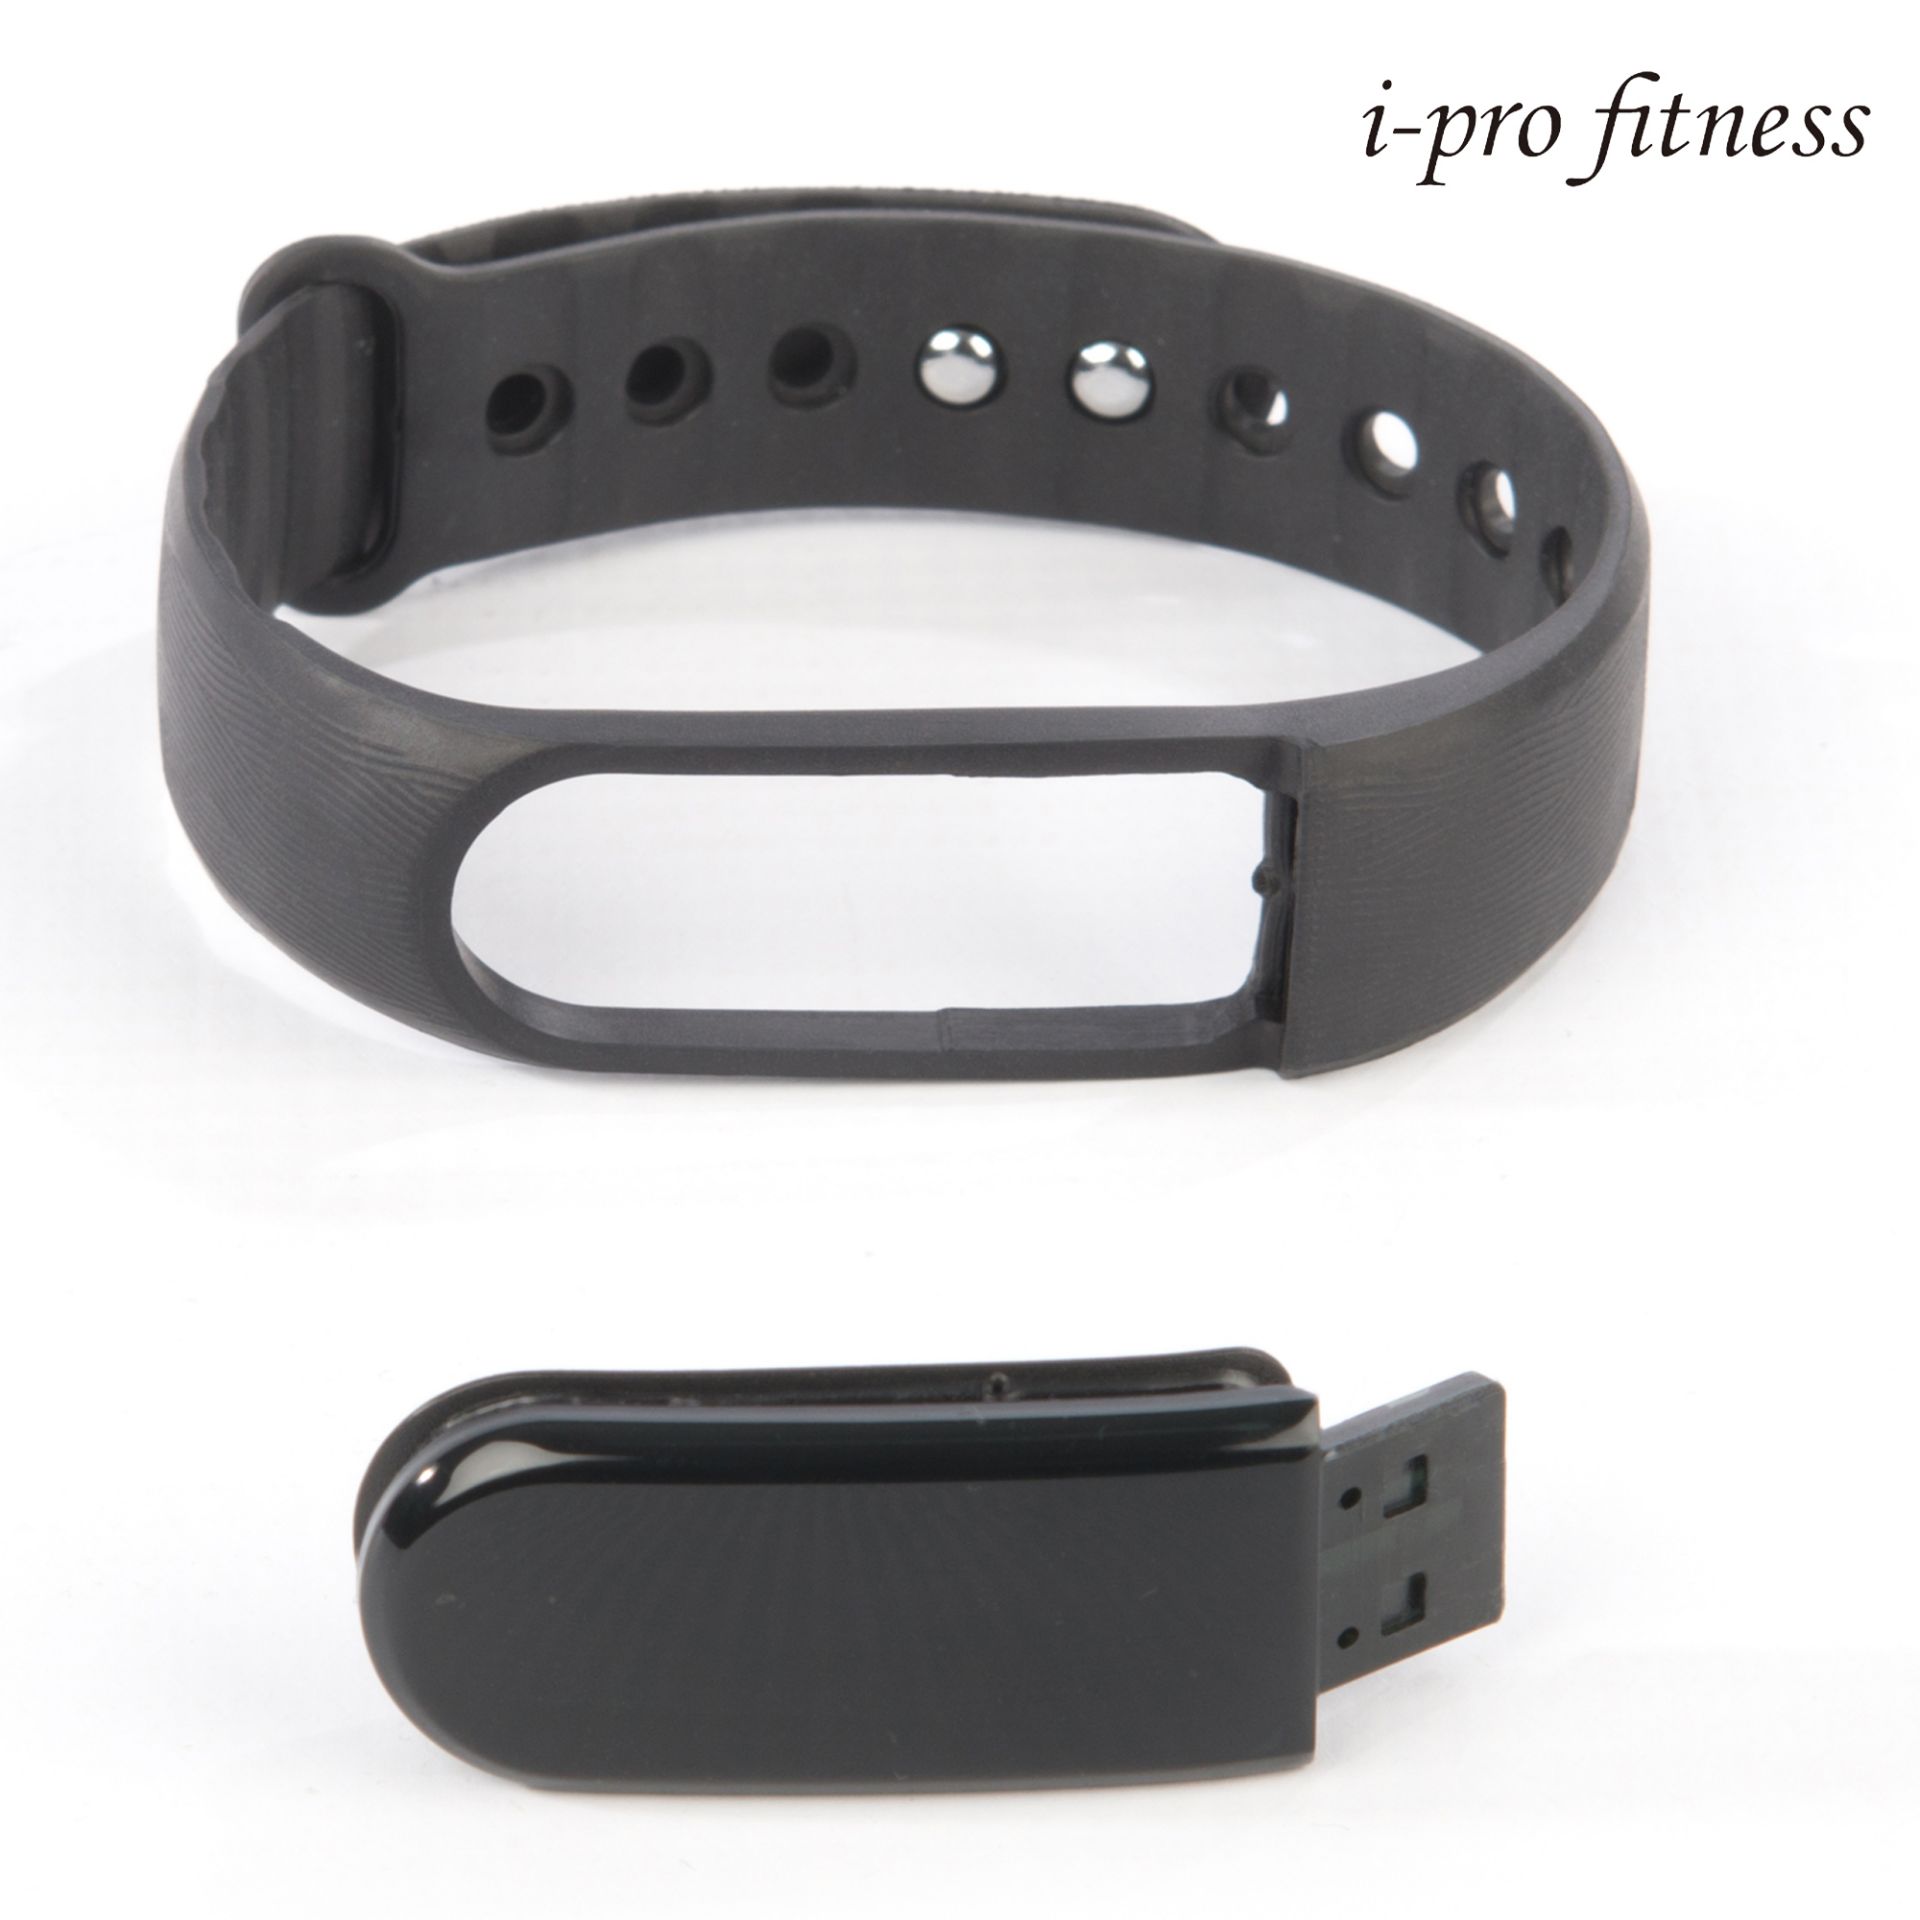 I-Pro Id101 Fitness Tracker Seamless Pairing With Veryfit 2.0 App Bluetooth Exercise Tracker, - Image 4 of 5